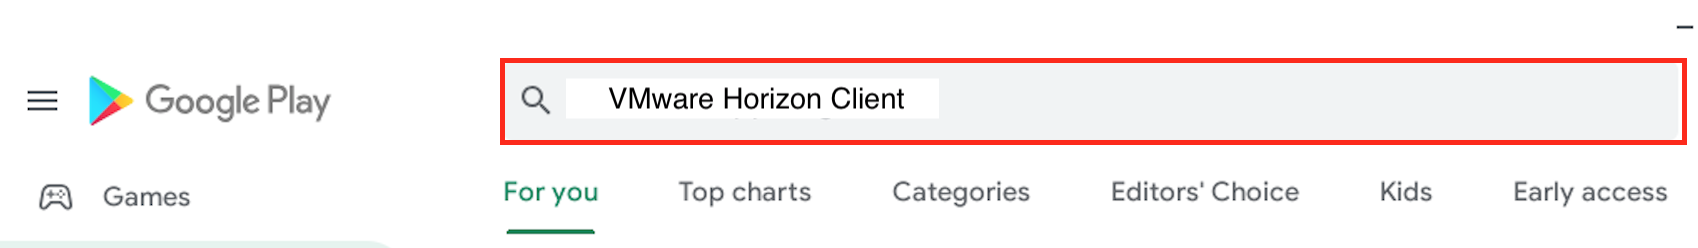 Search for “VMware Horizon Client”